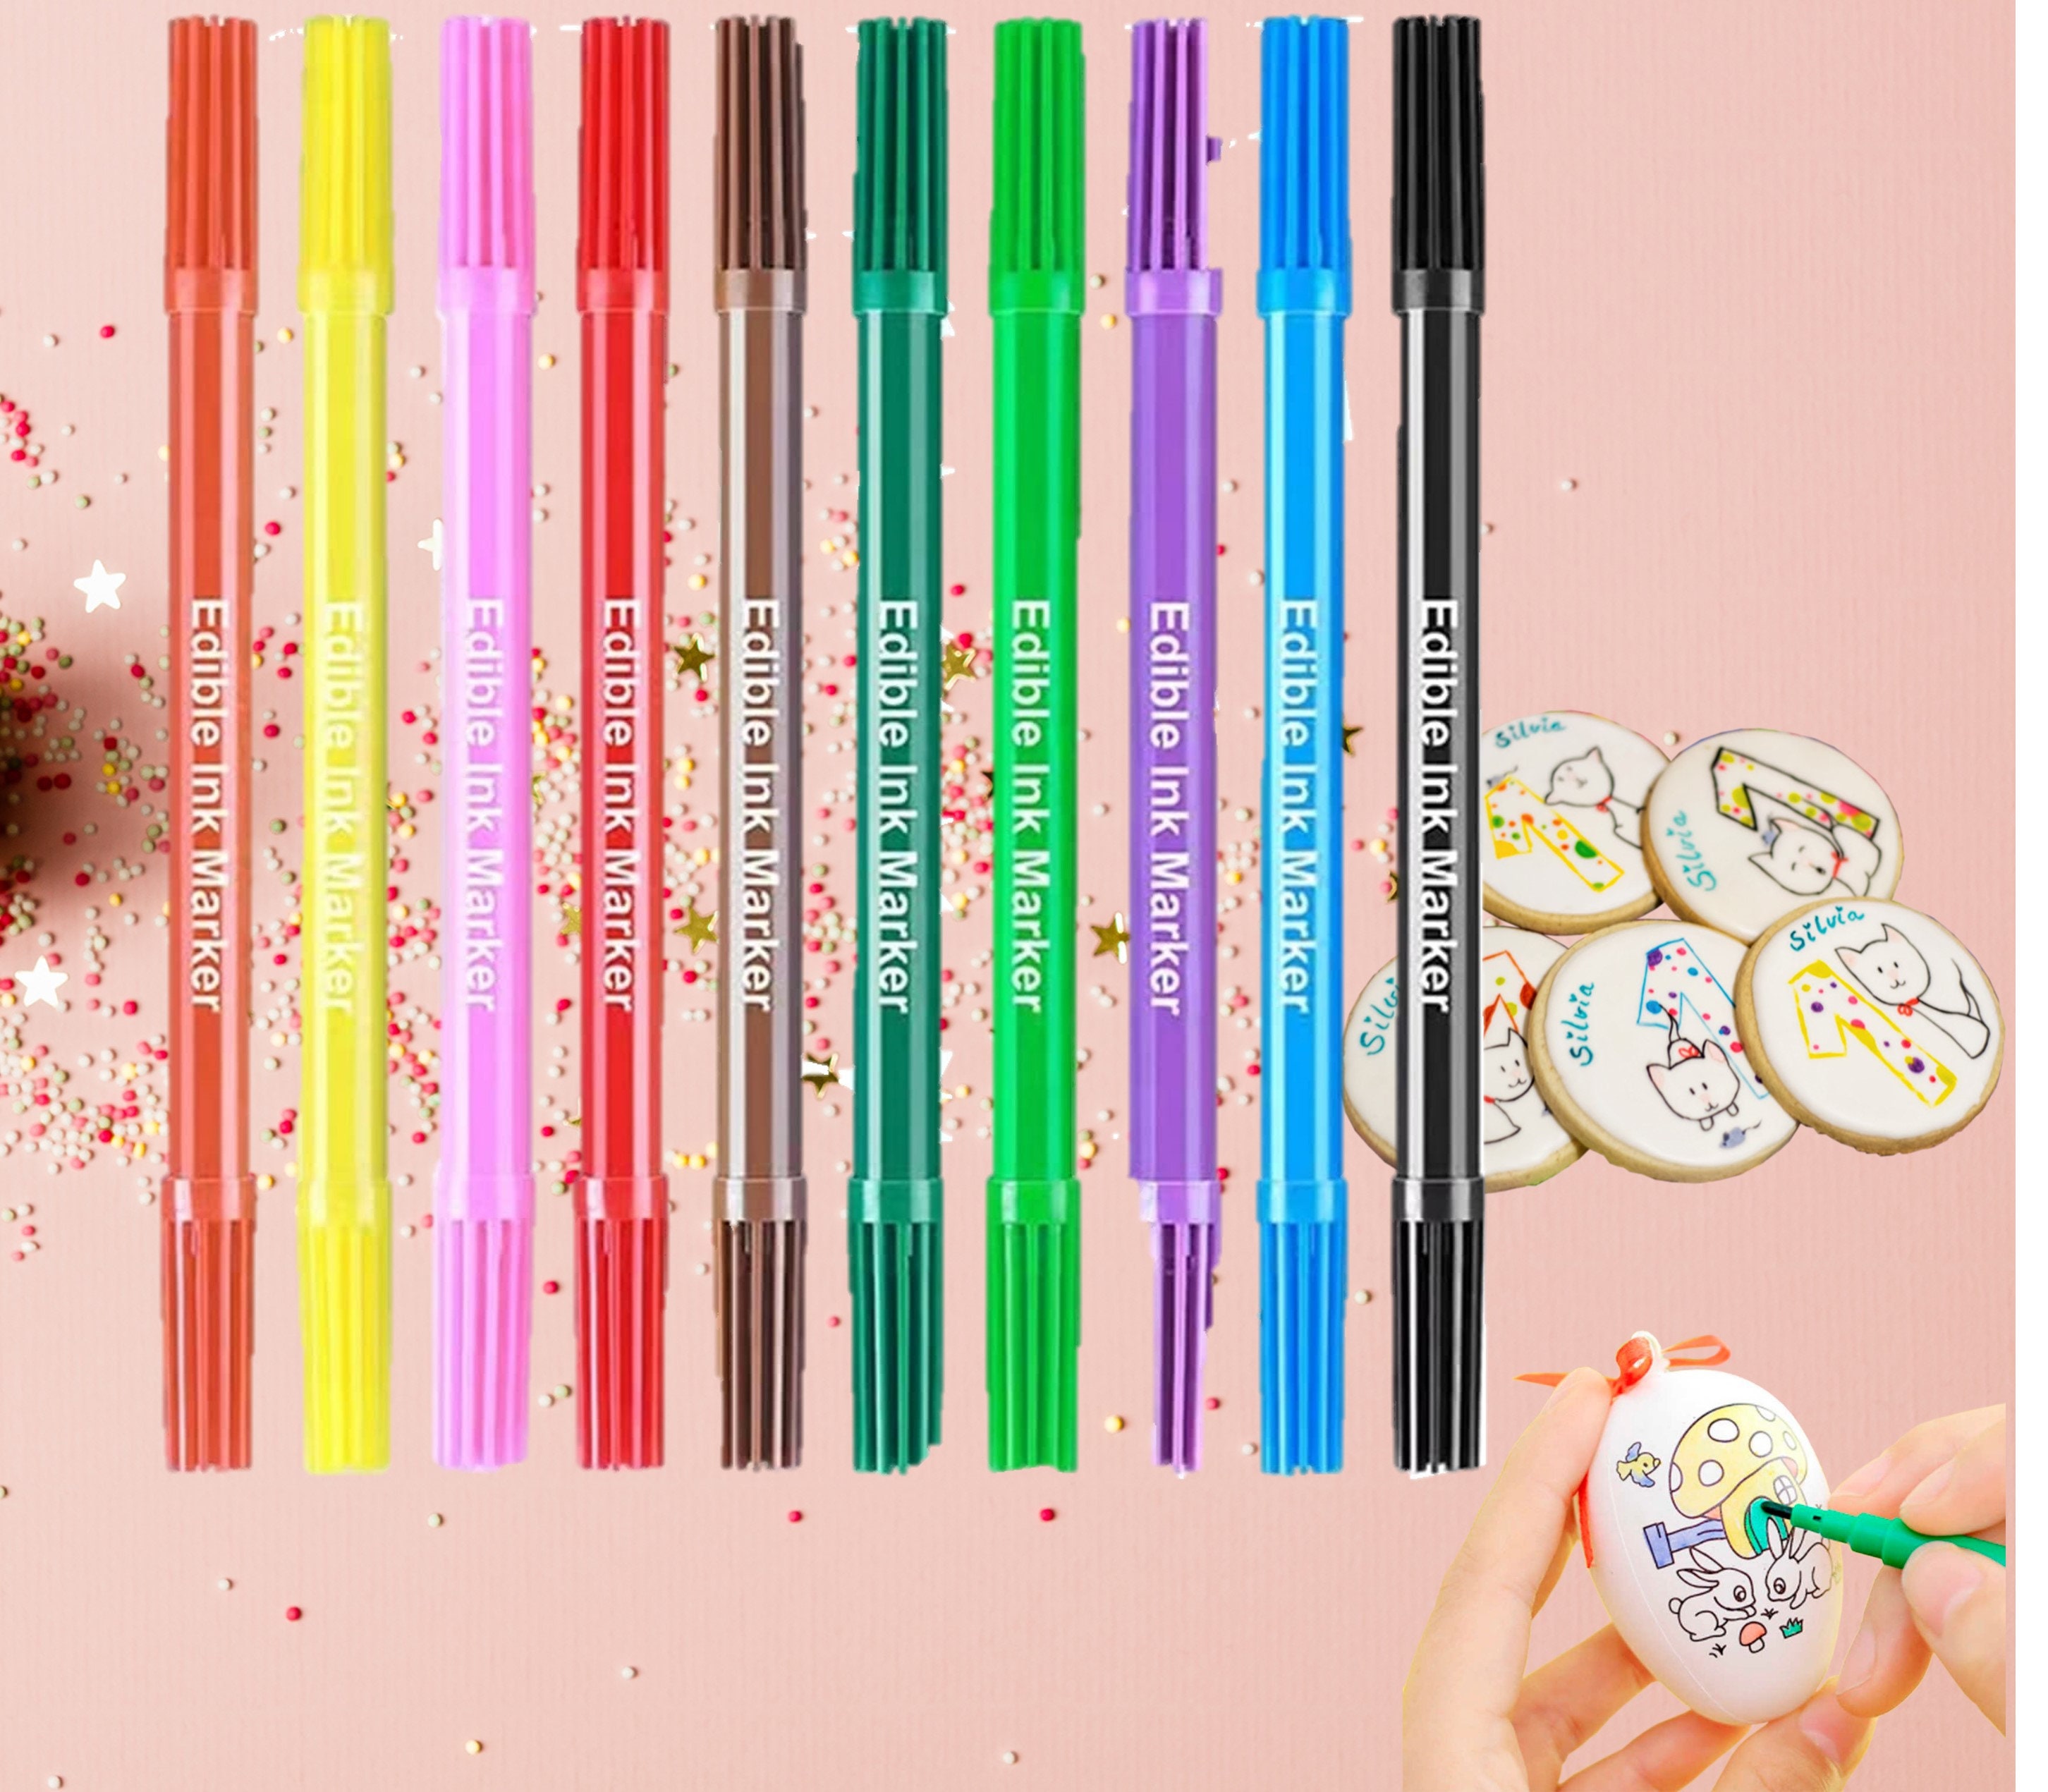 FAST SHIPPING Dripcolor Classic Set 1 of 6 Edible Markers, Food